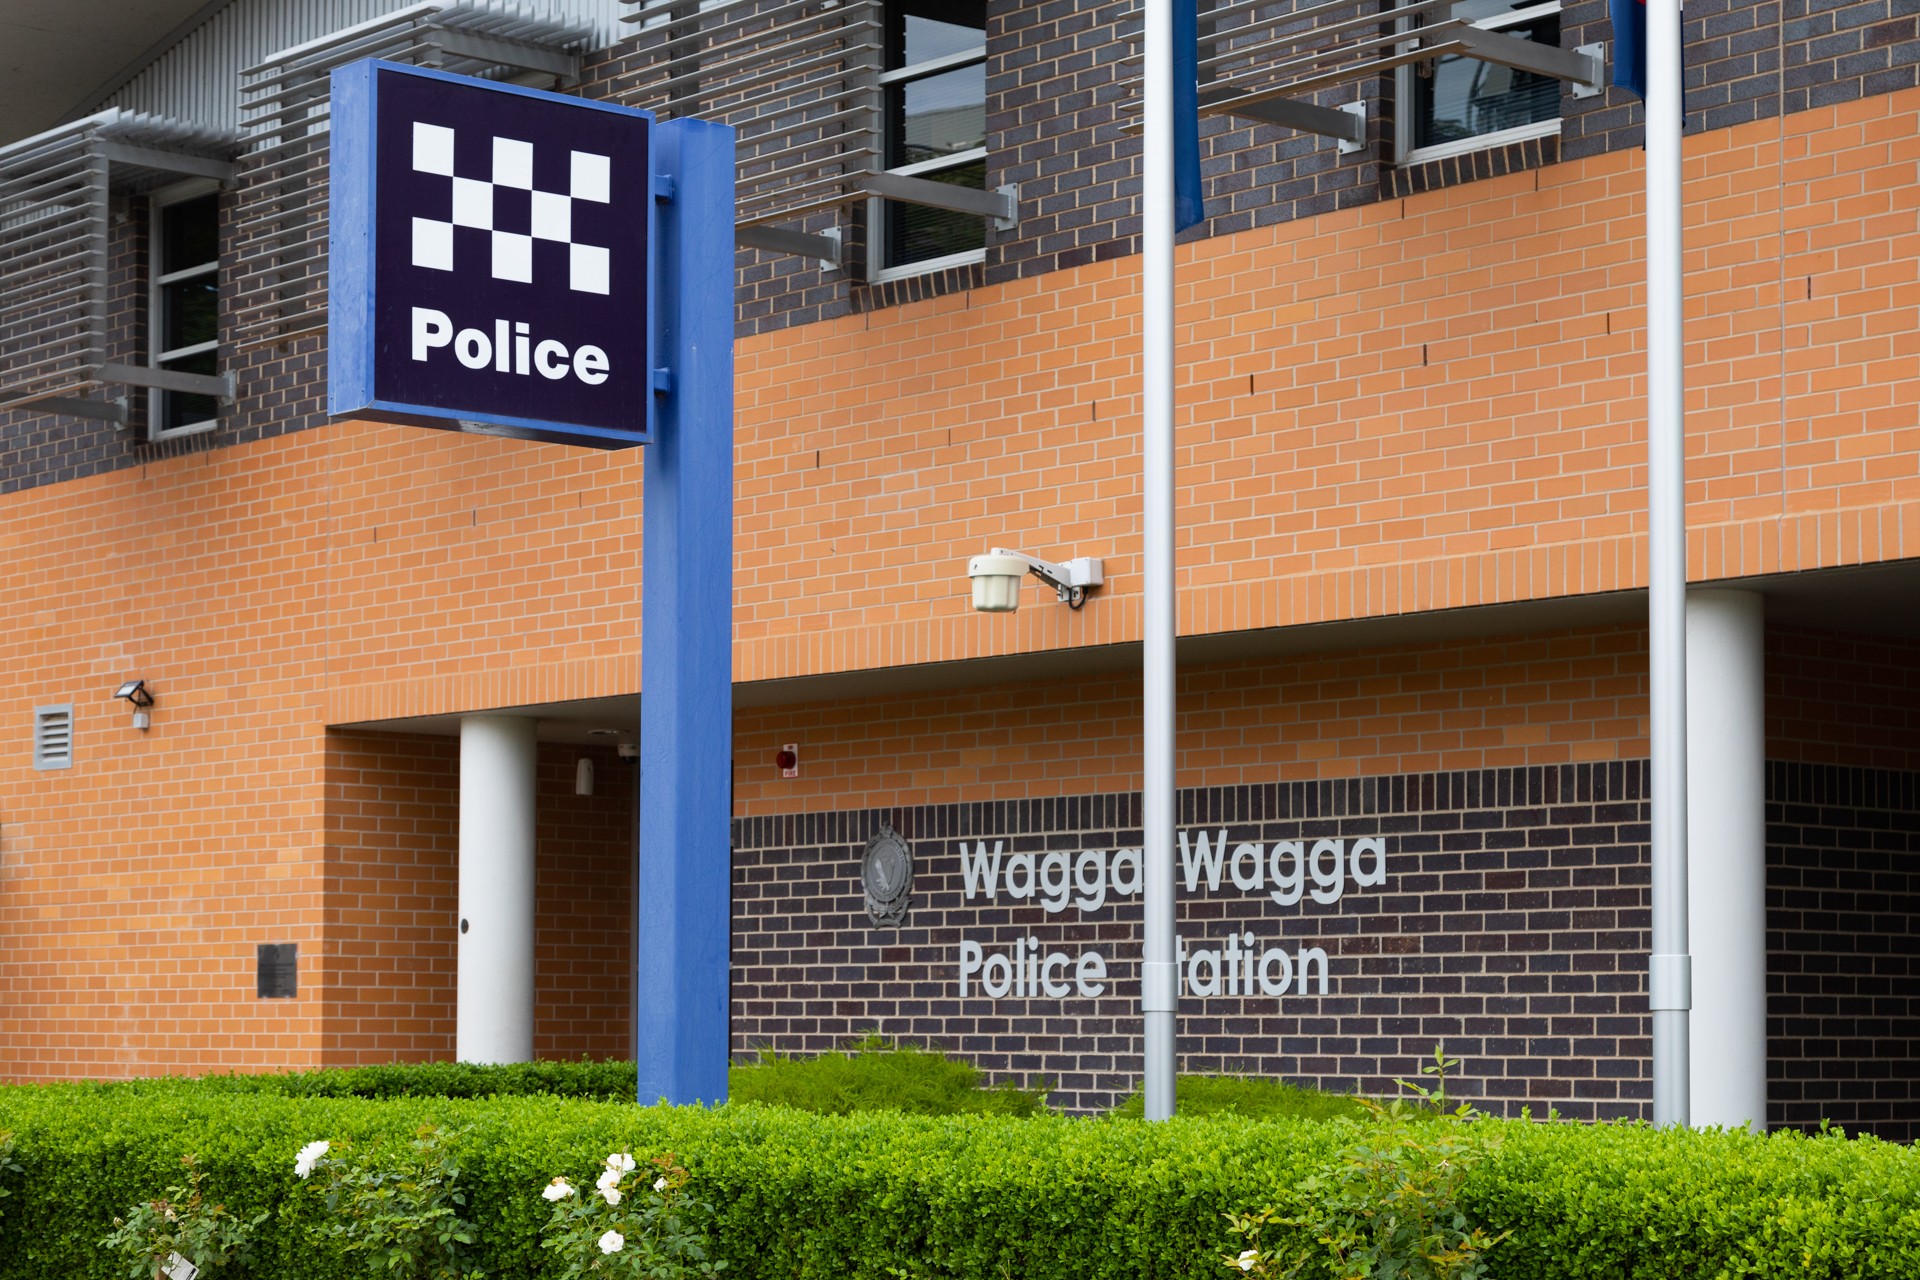 Four men charged over alleged drug deals in Wagga hotels